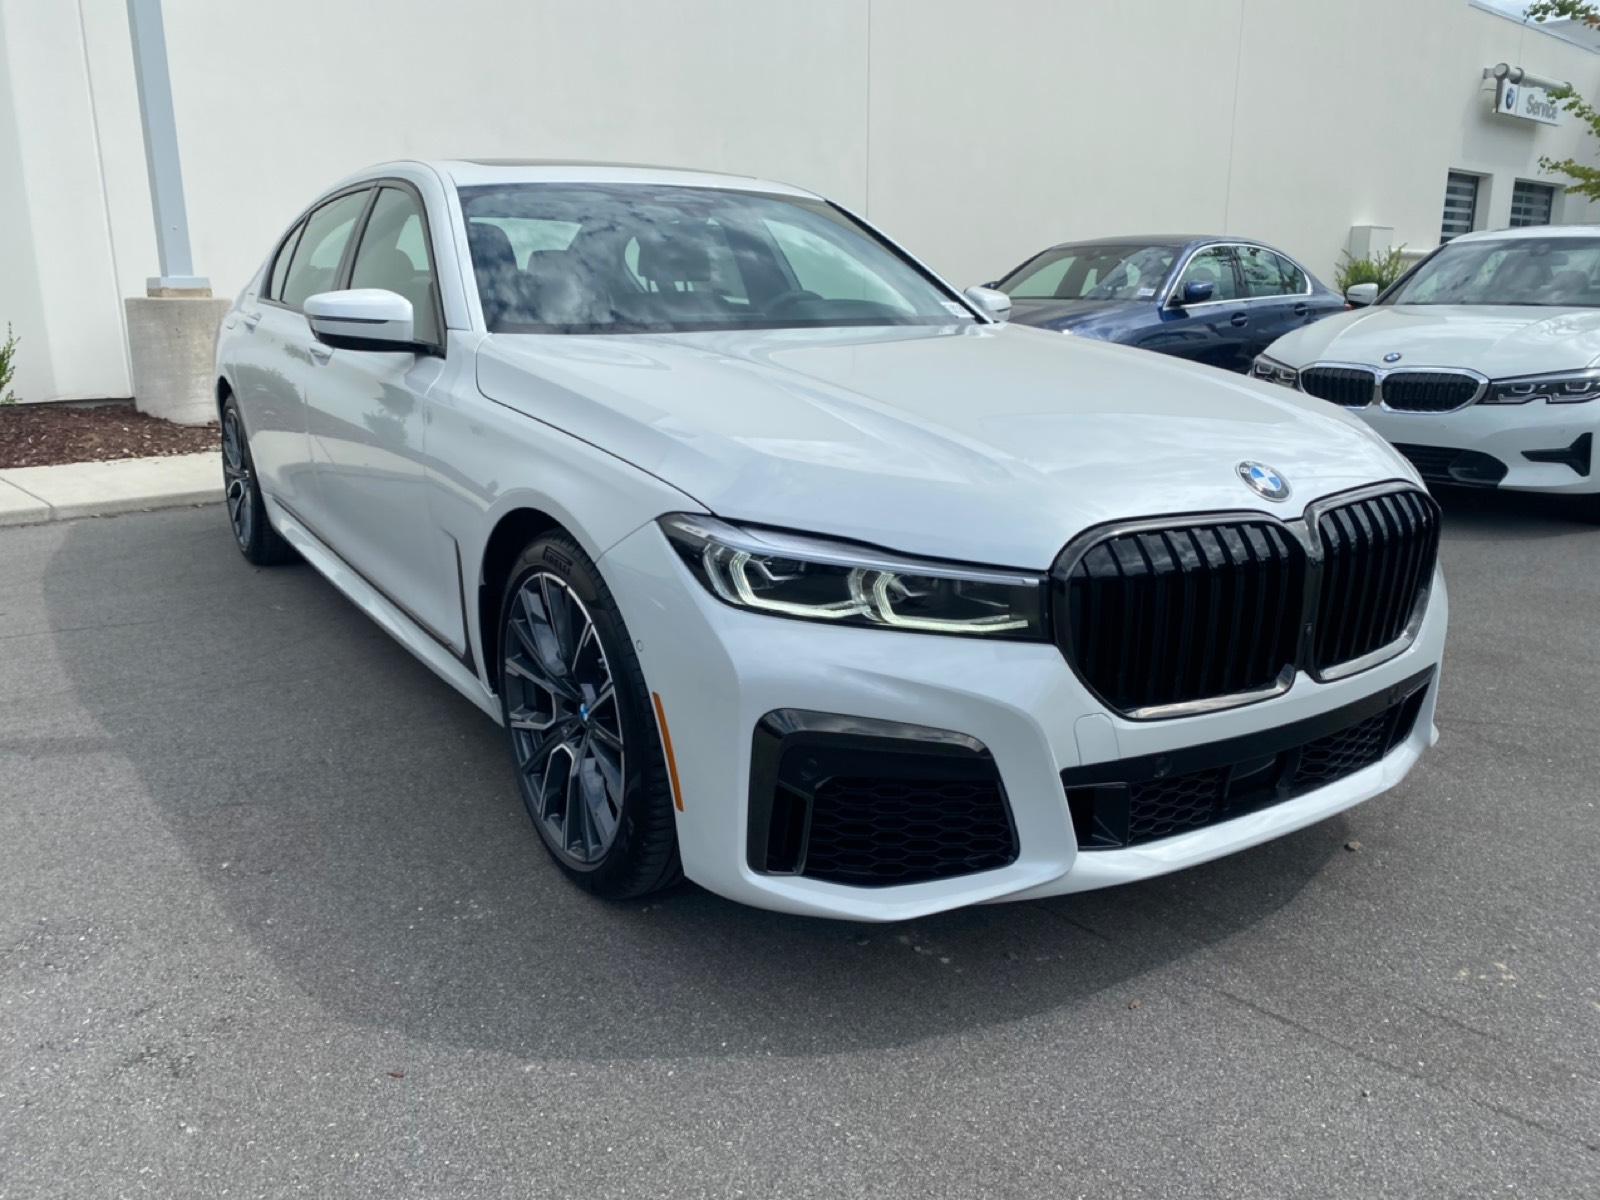 New 2021 BMW 740i For Sale Wilmington NC | #C3812